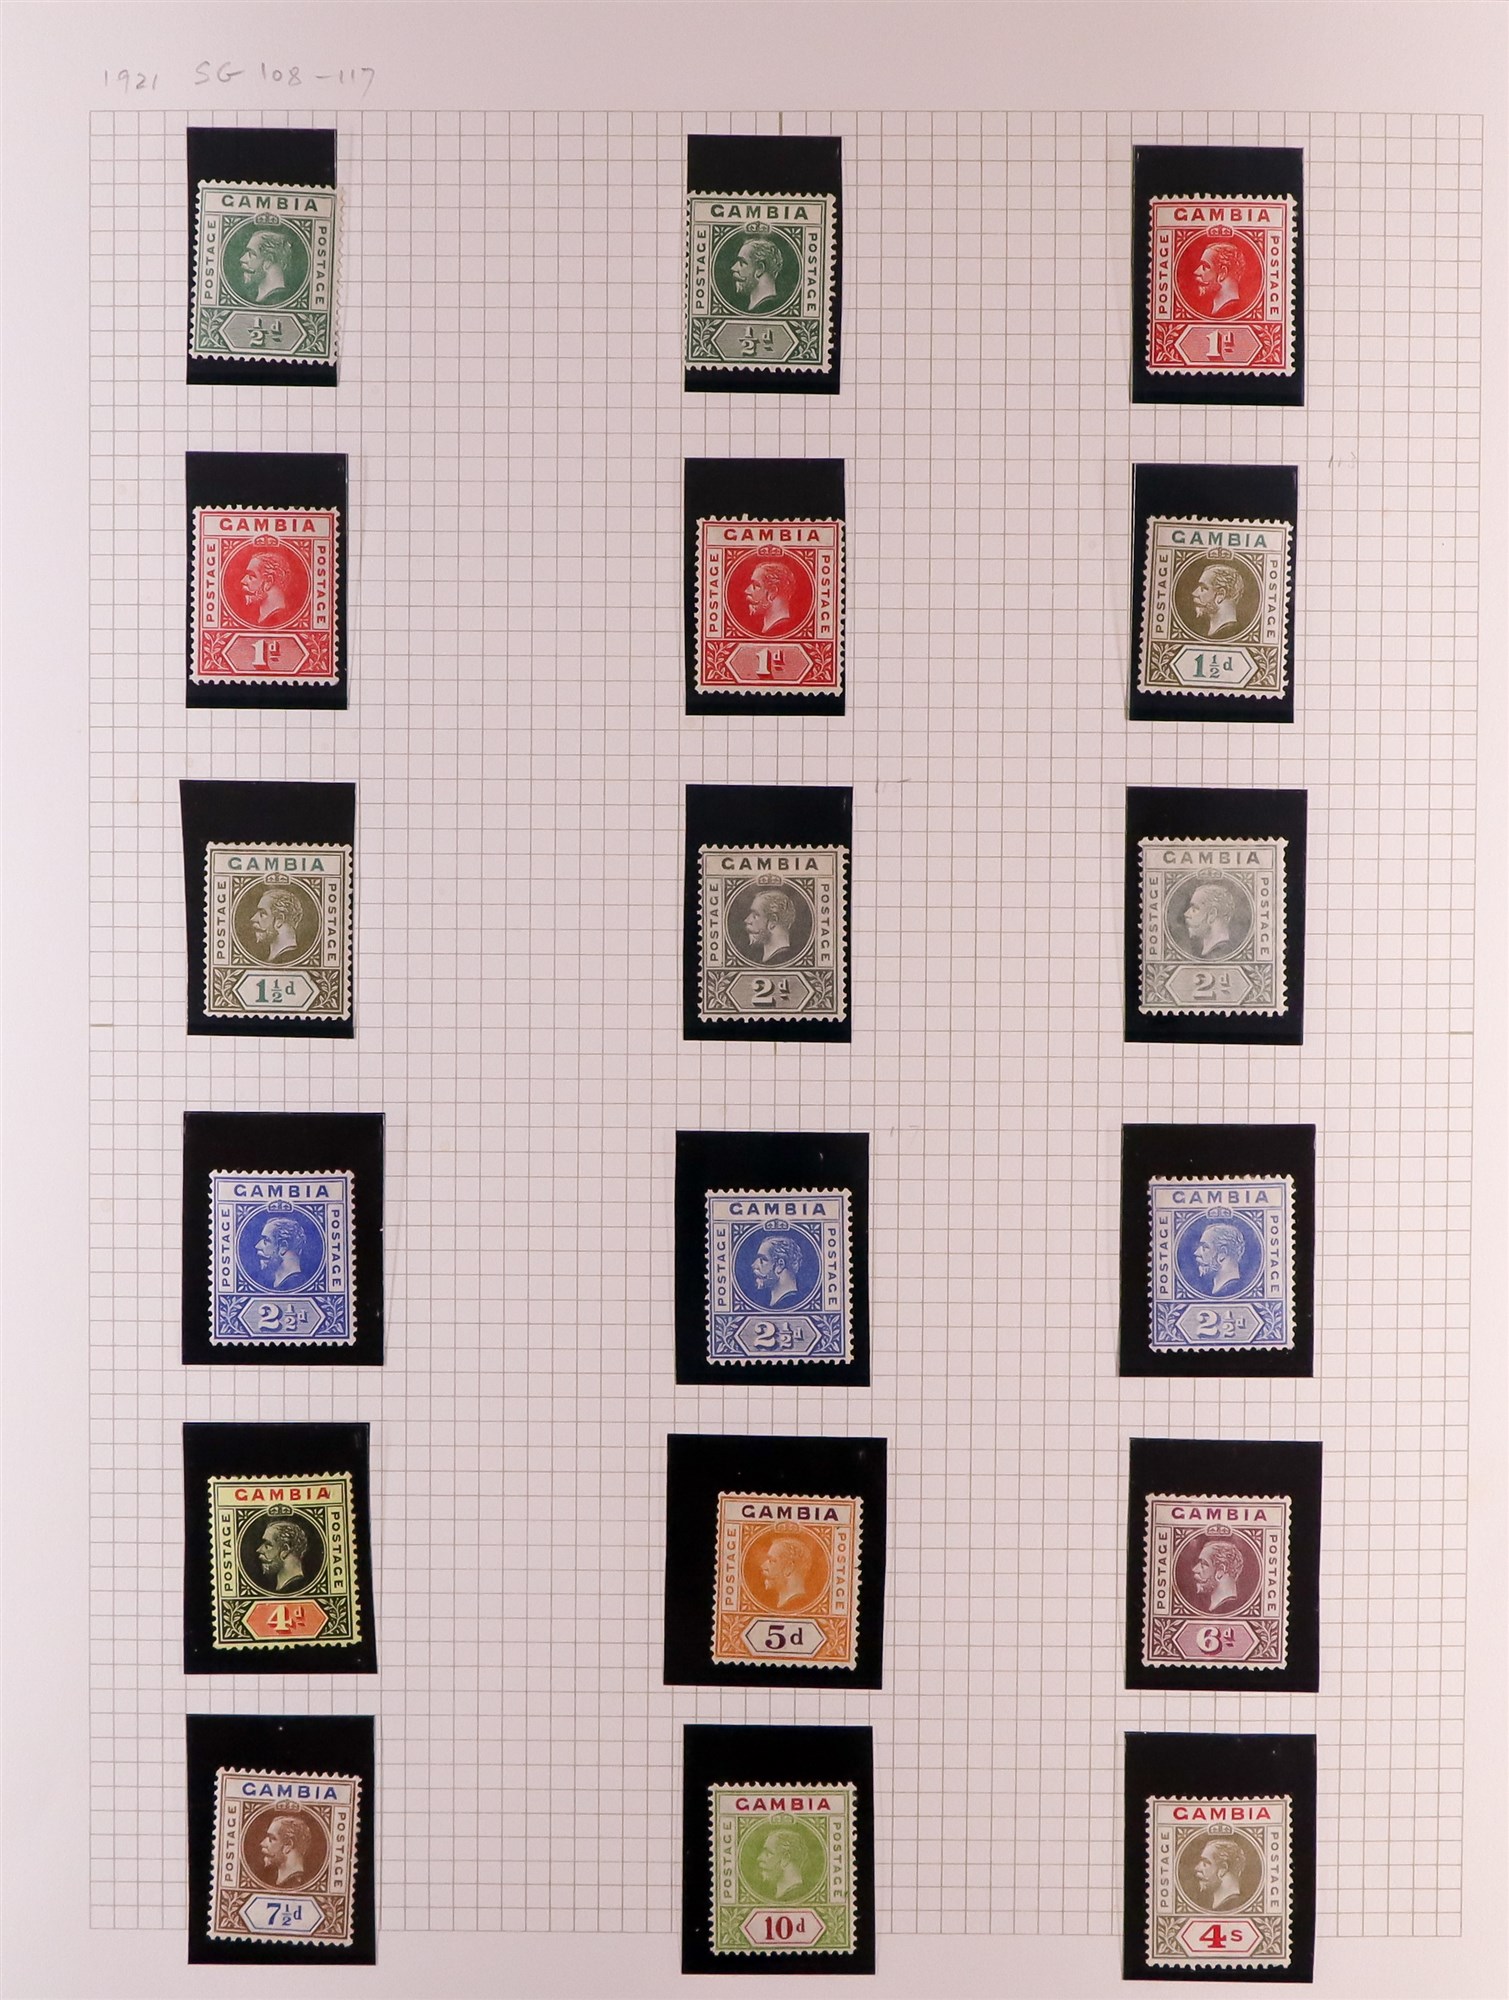 GAMBIA 1880 - 1935 COLLECTION incl. various Cameo issues mint, 1s violet used strip 3, 1902-05 set - Image 11 of 15